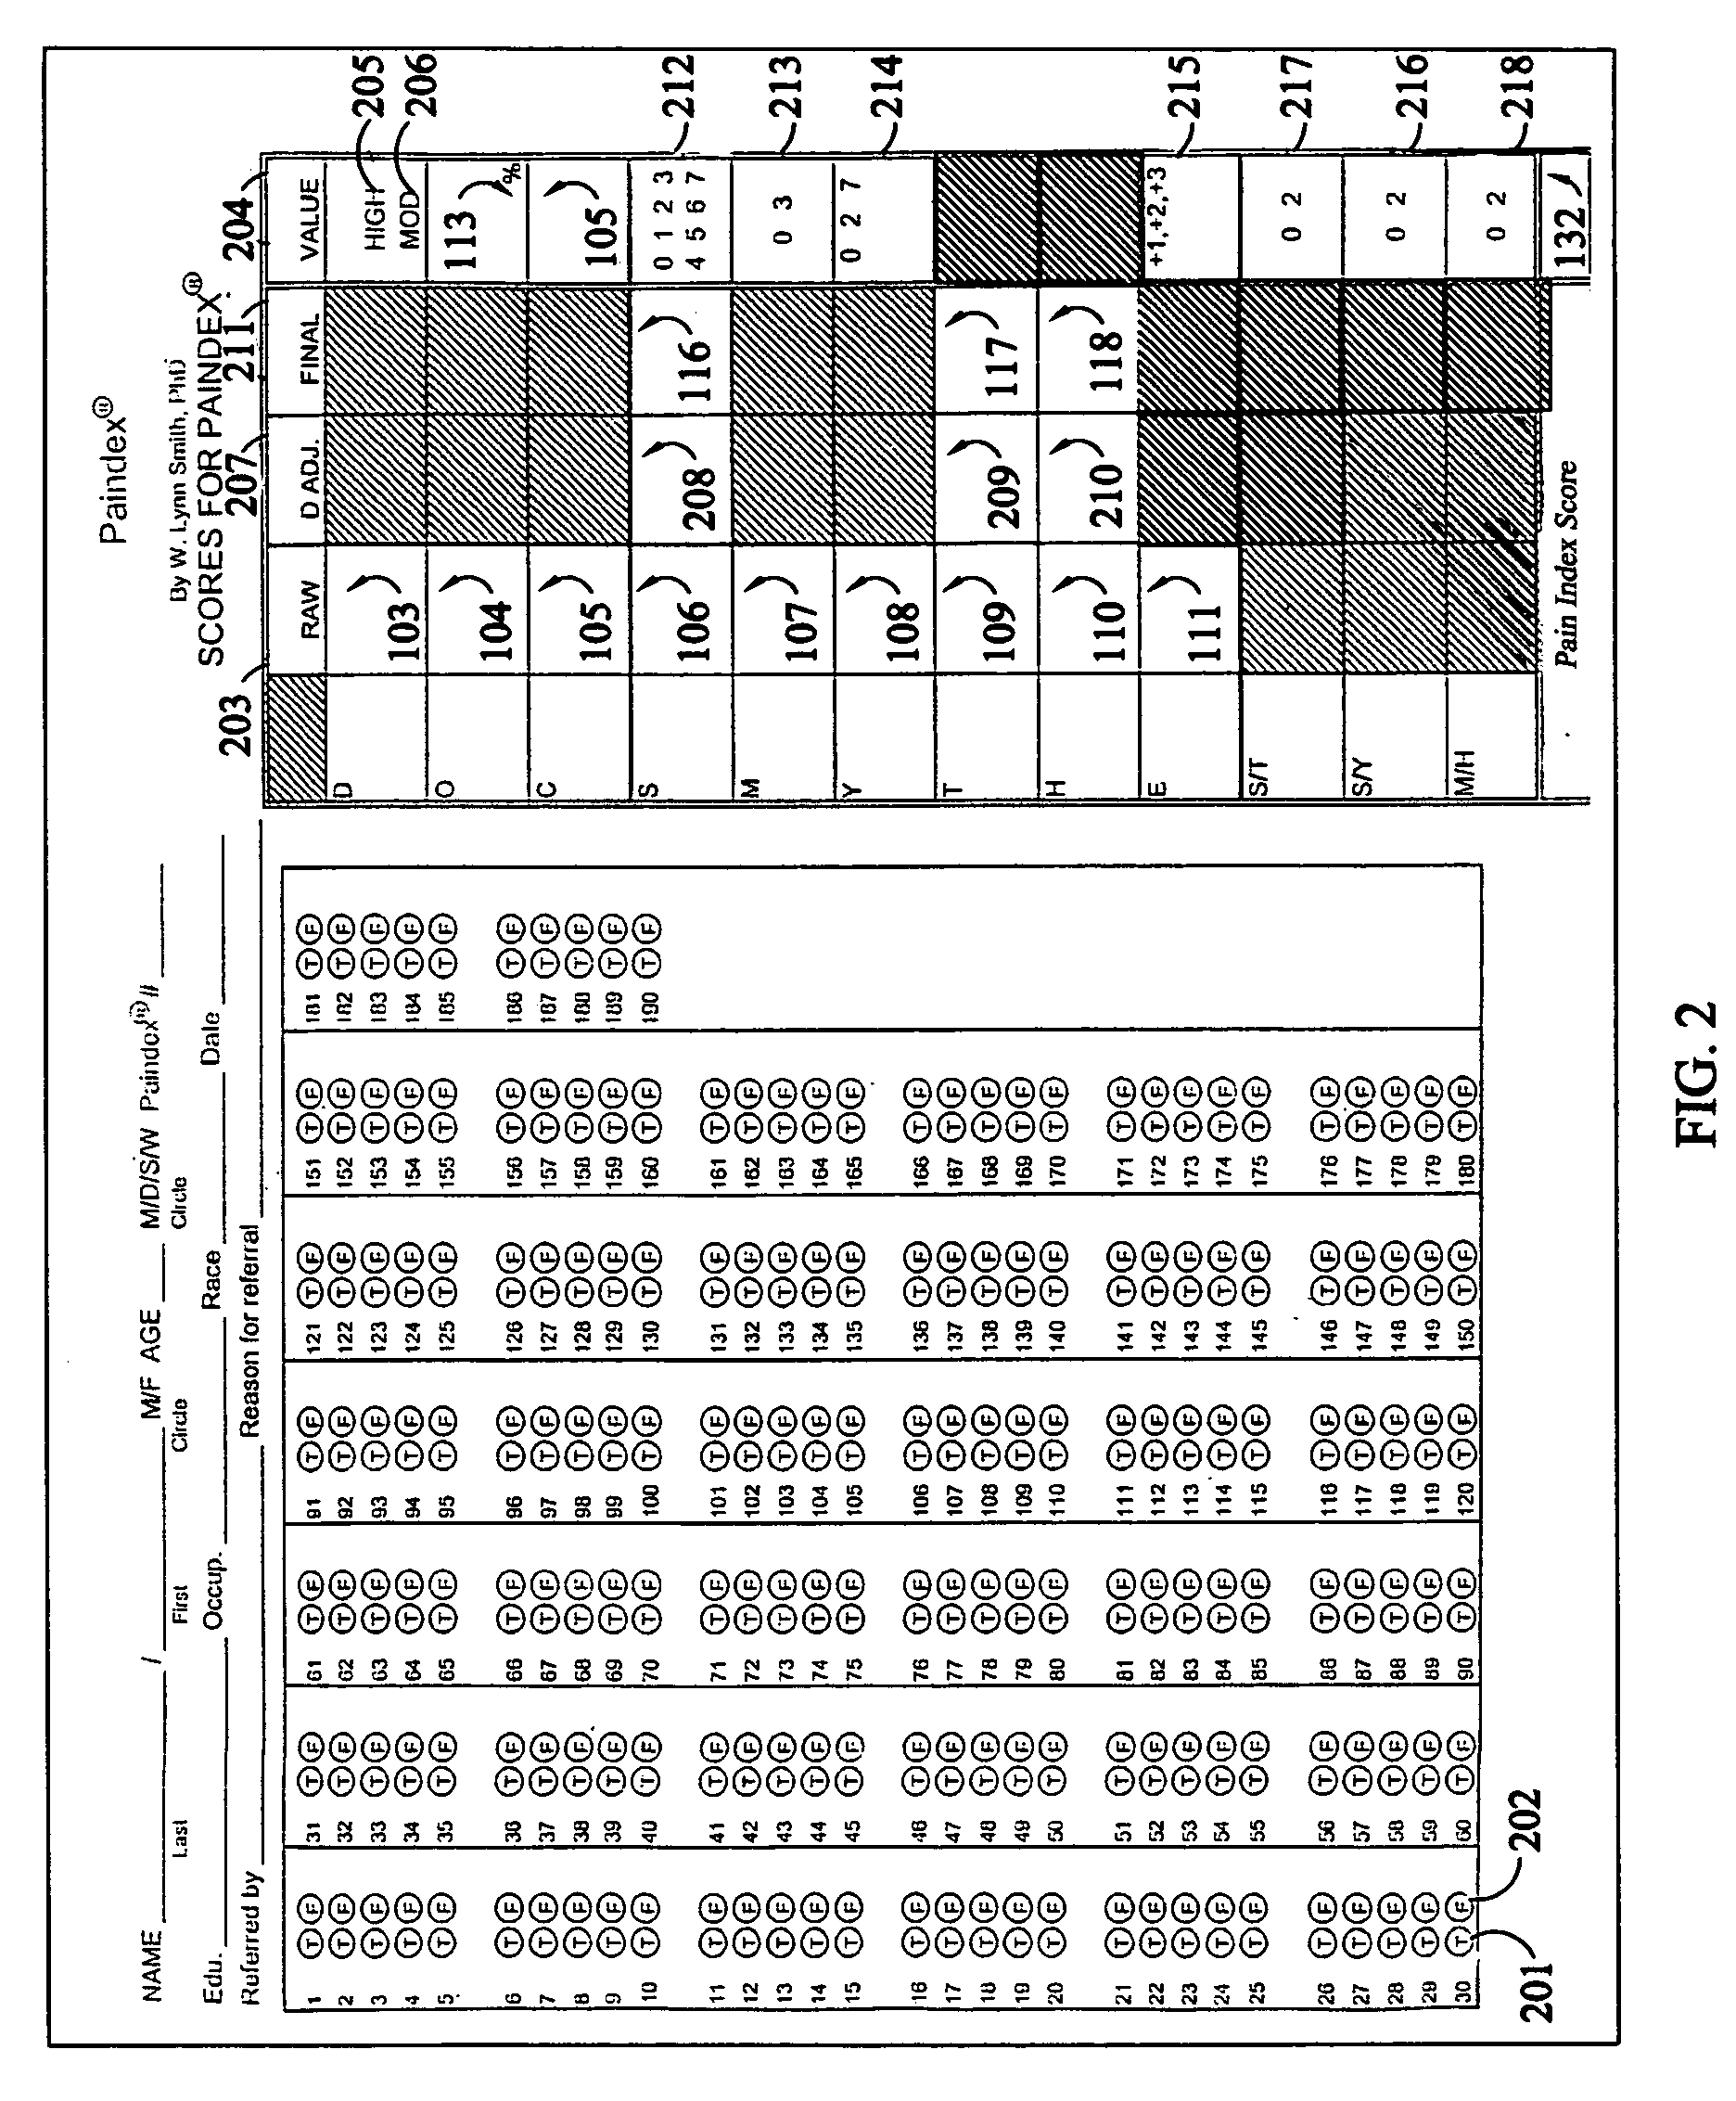 Method for diagnosis of pain relief probability through medical treatment